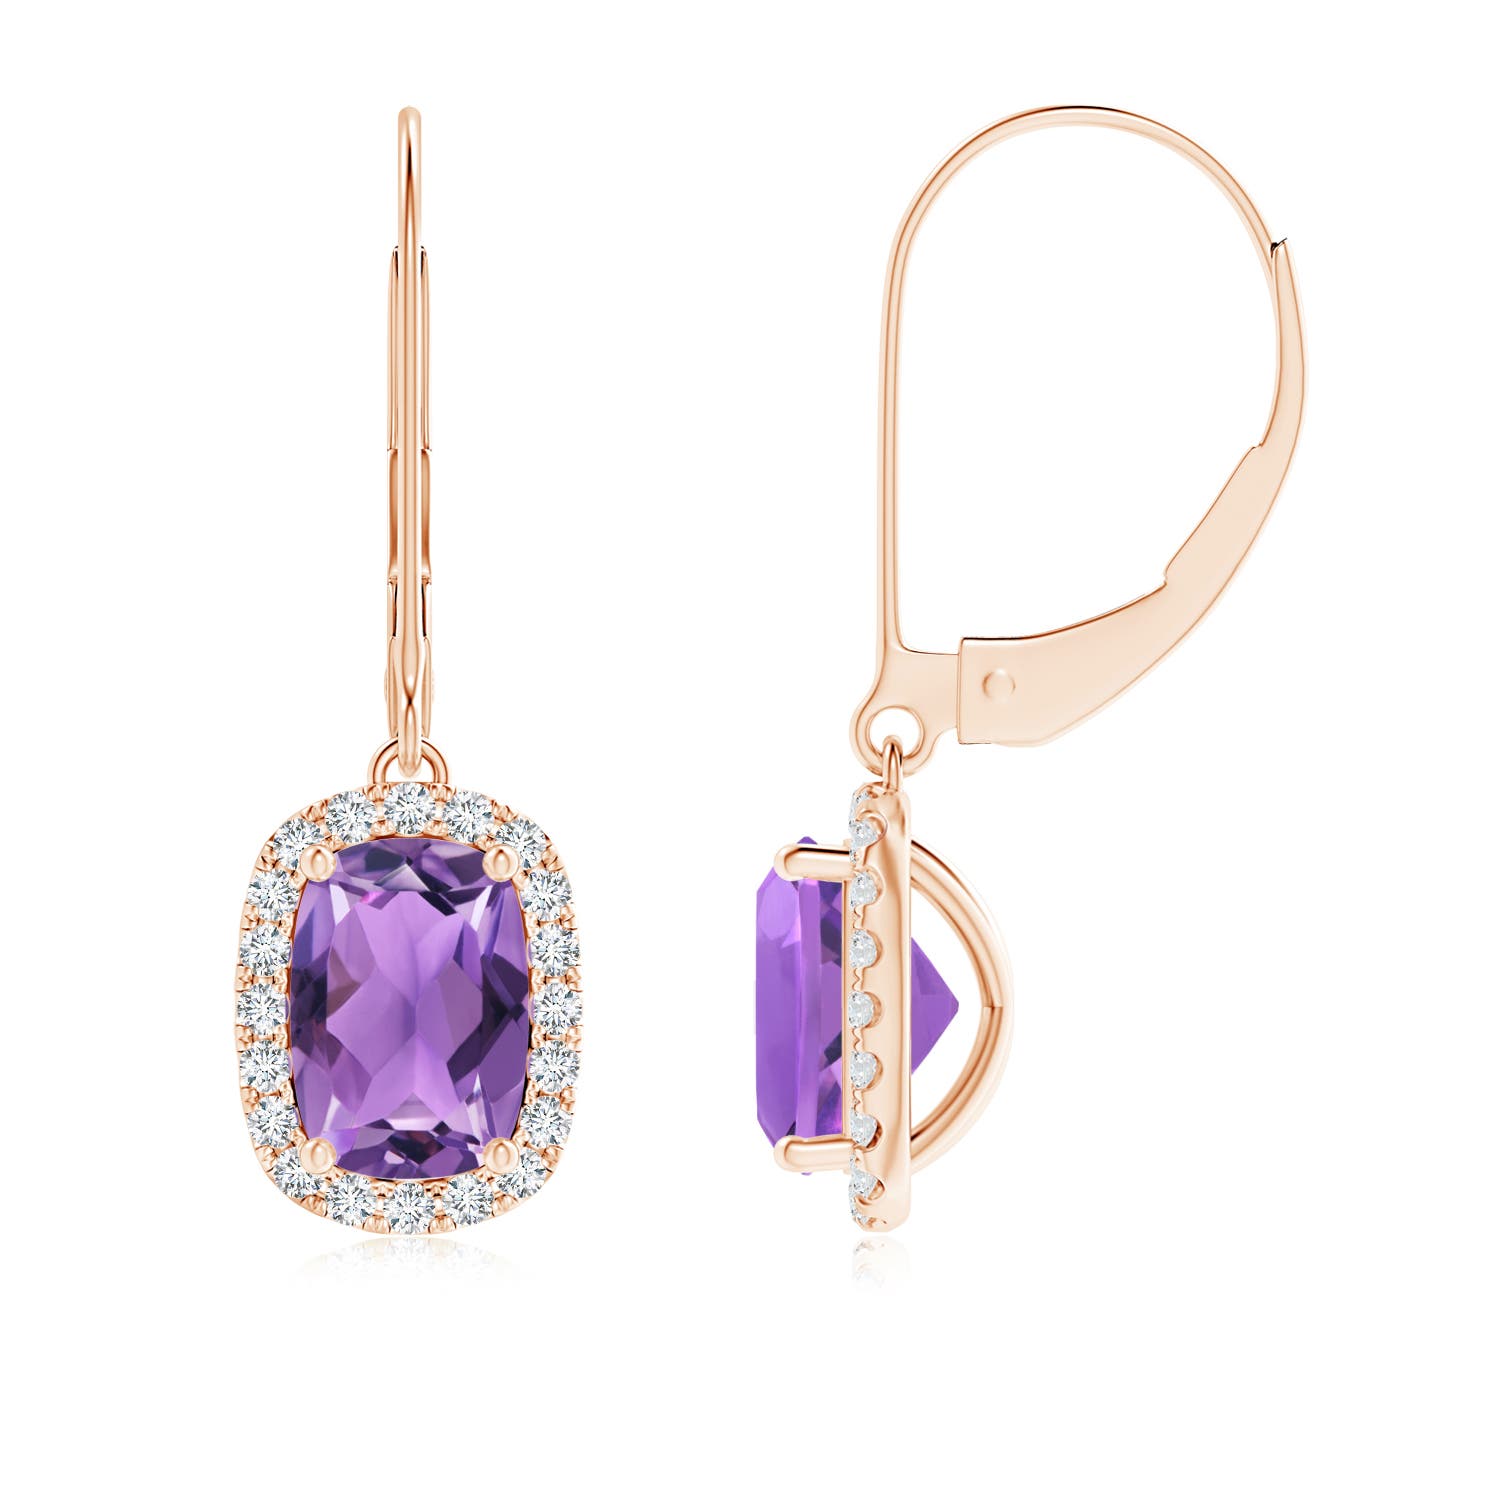 AA - Amethyst / 1.64 CT / 14 KT Rose Gold